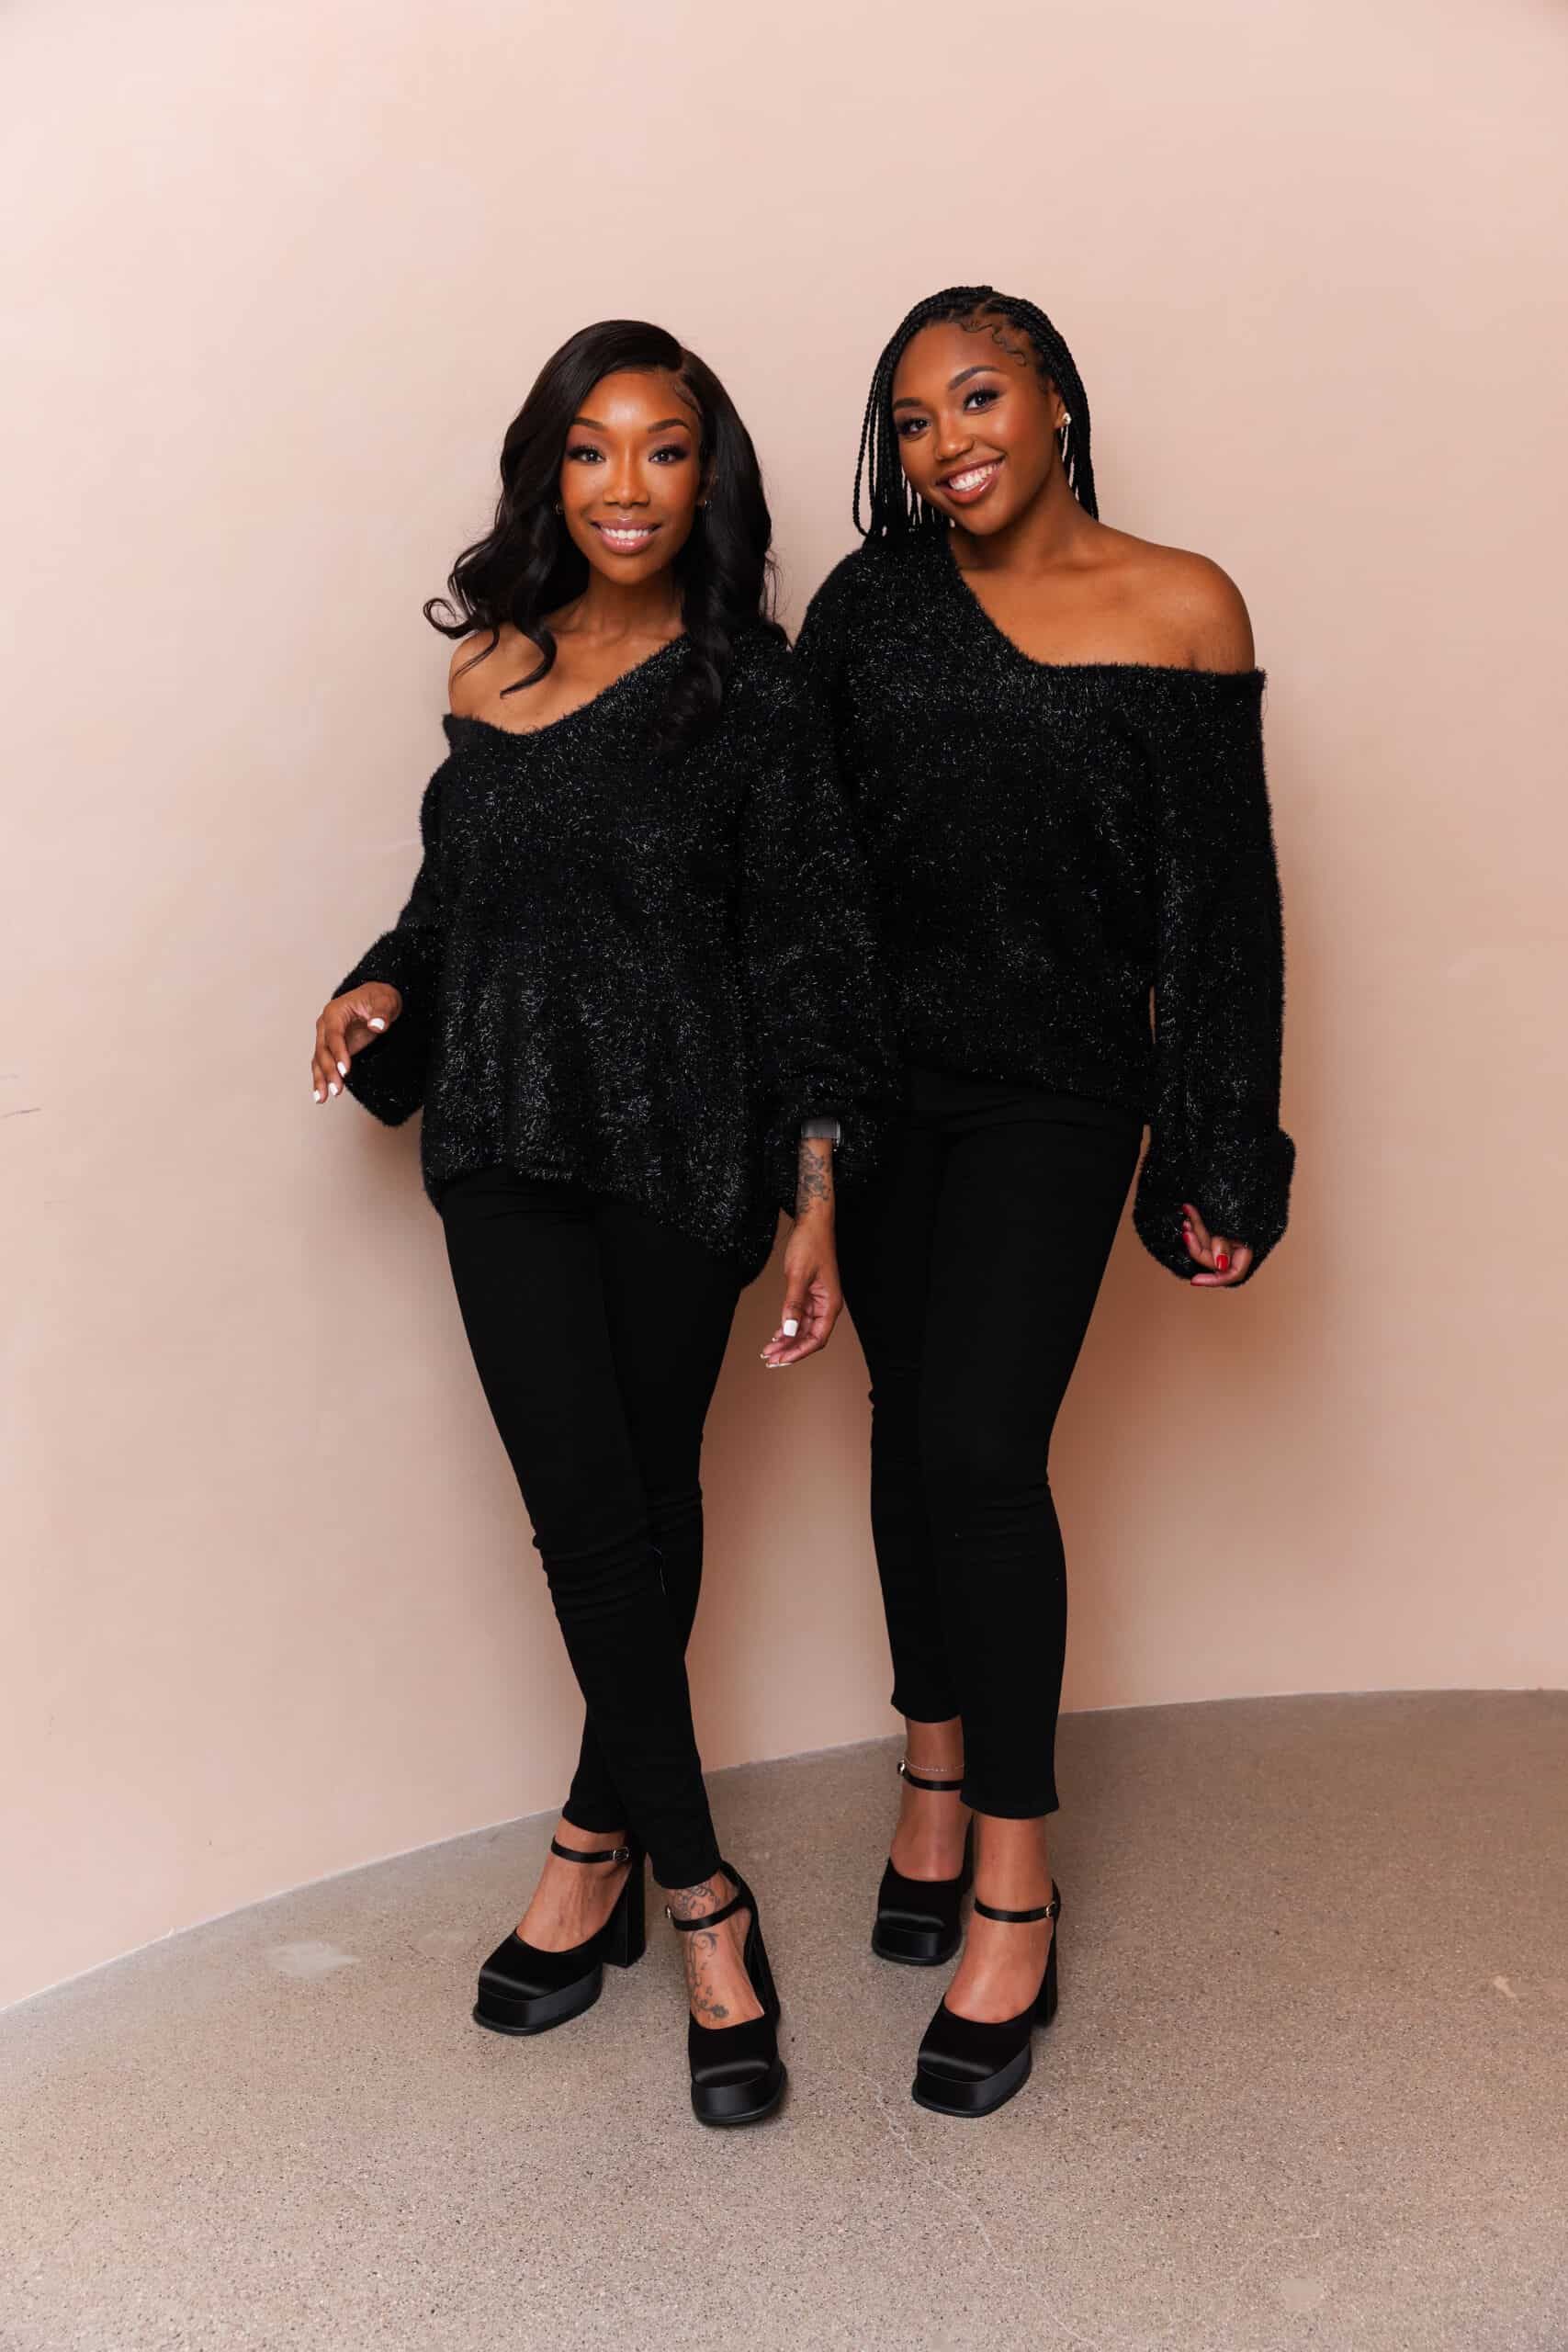 Brandy Opens Up About Recording With Daughter Sy'Rai For New Holiday Album